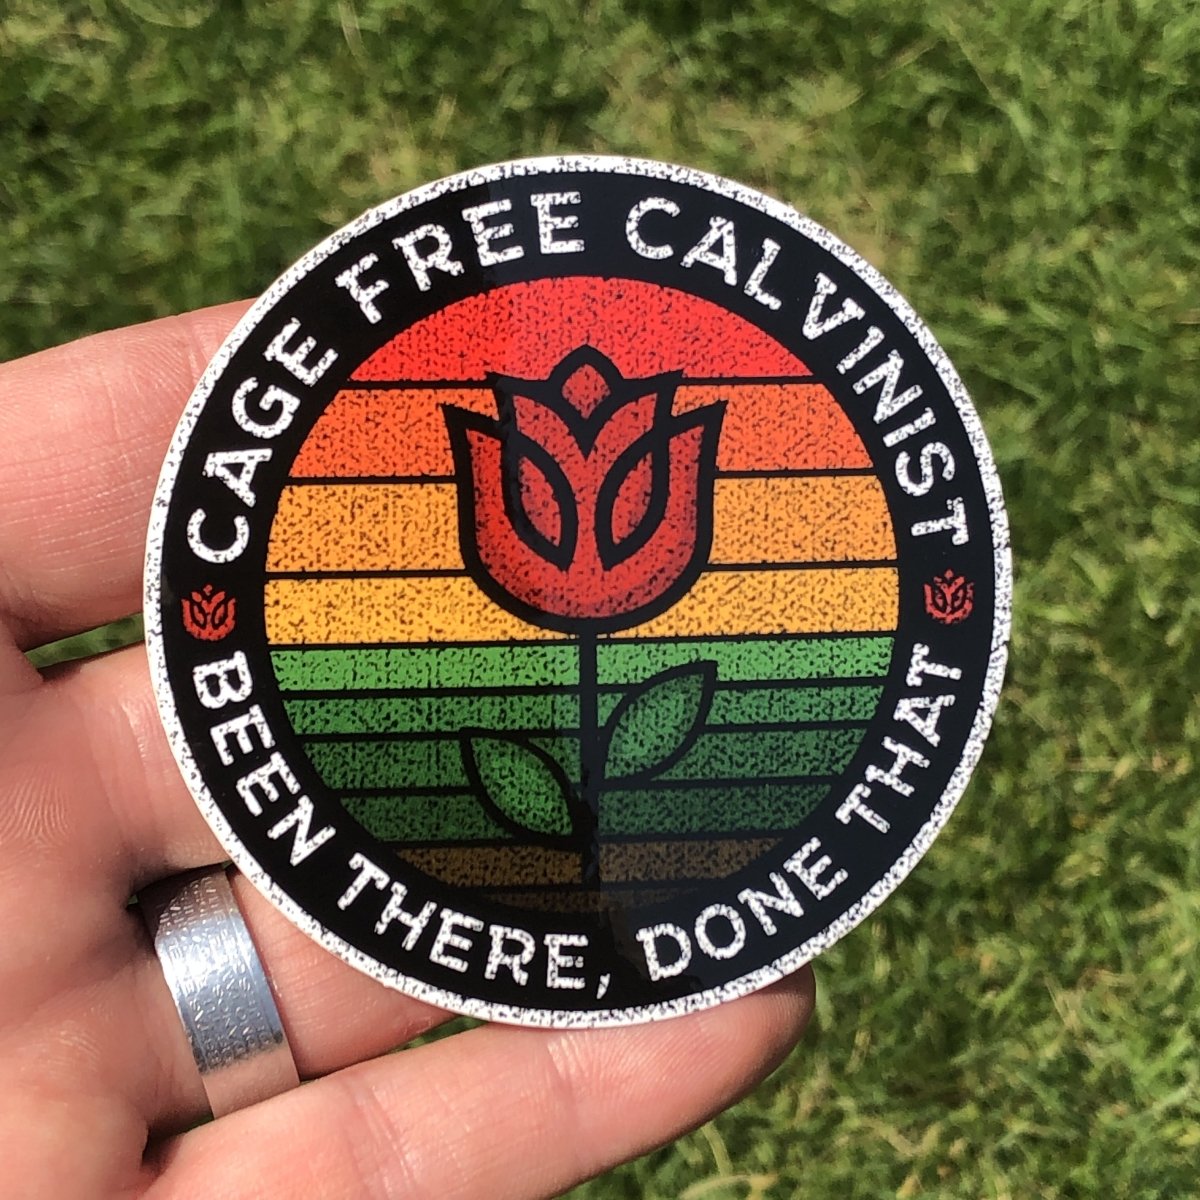 Decal - Cage Free Calvinist - Decal - The Reformed Sage - #reformed# - #reformed_gifts# - #christian_gifts#